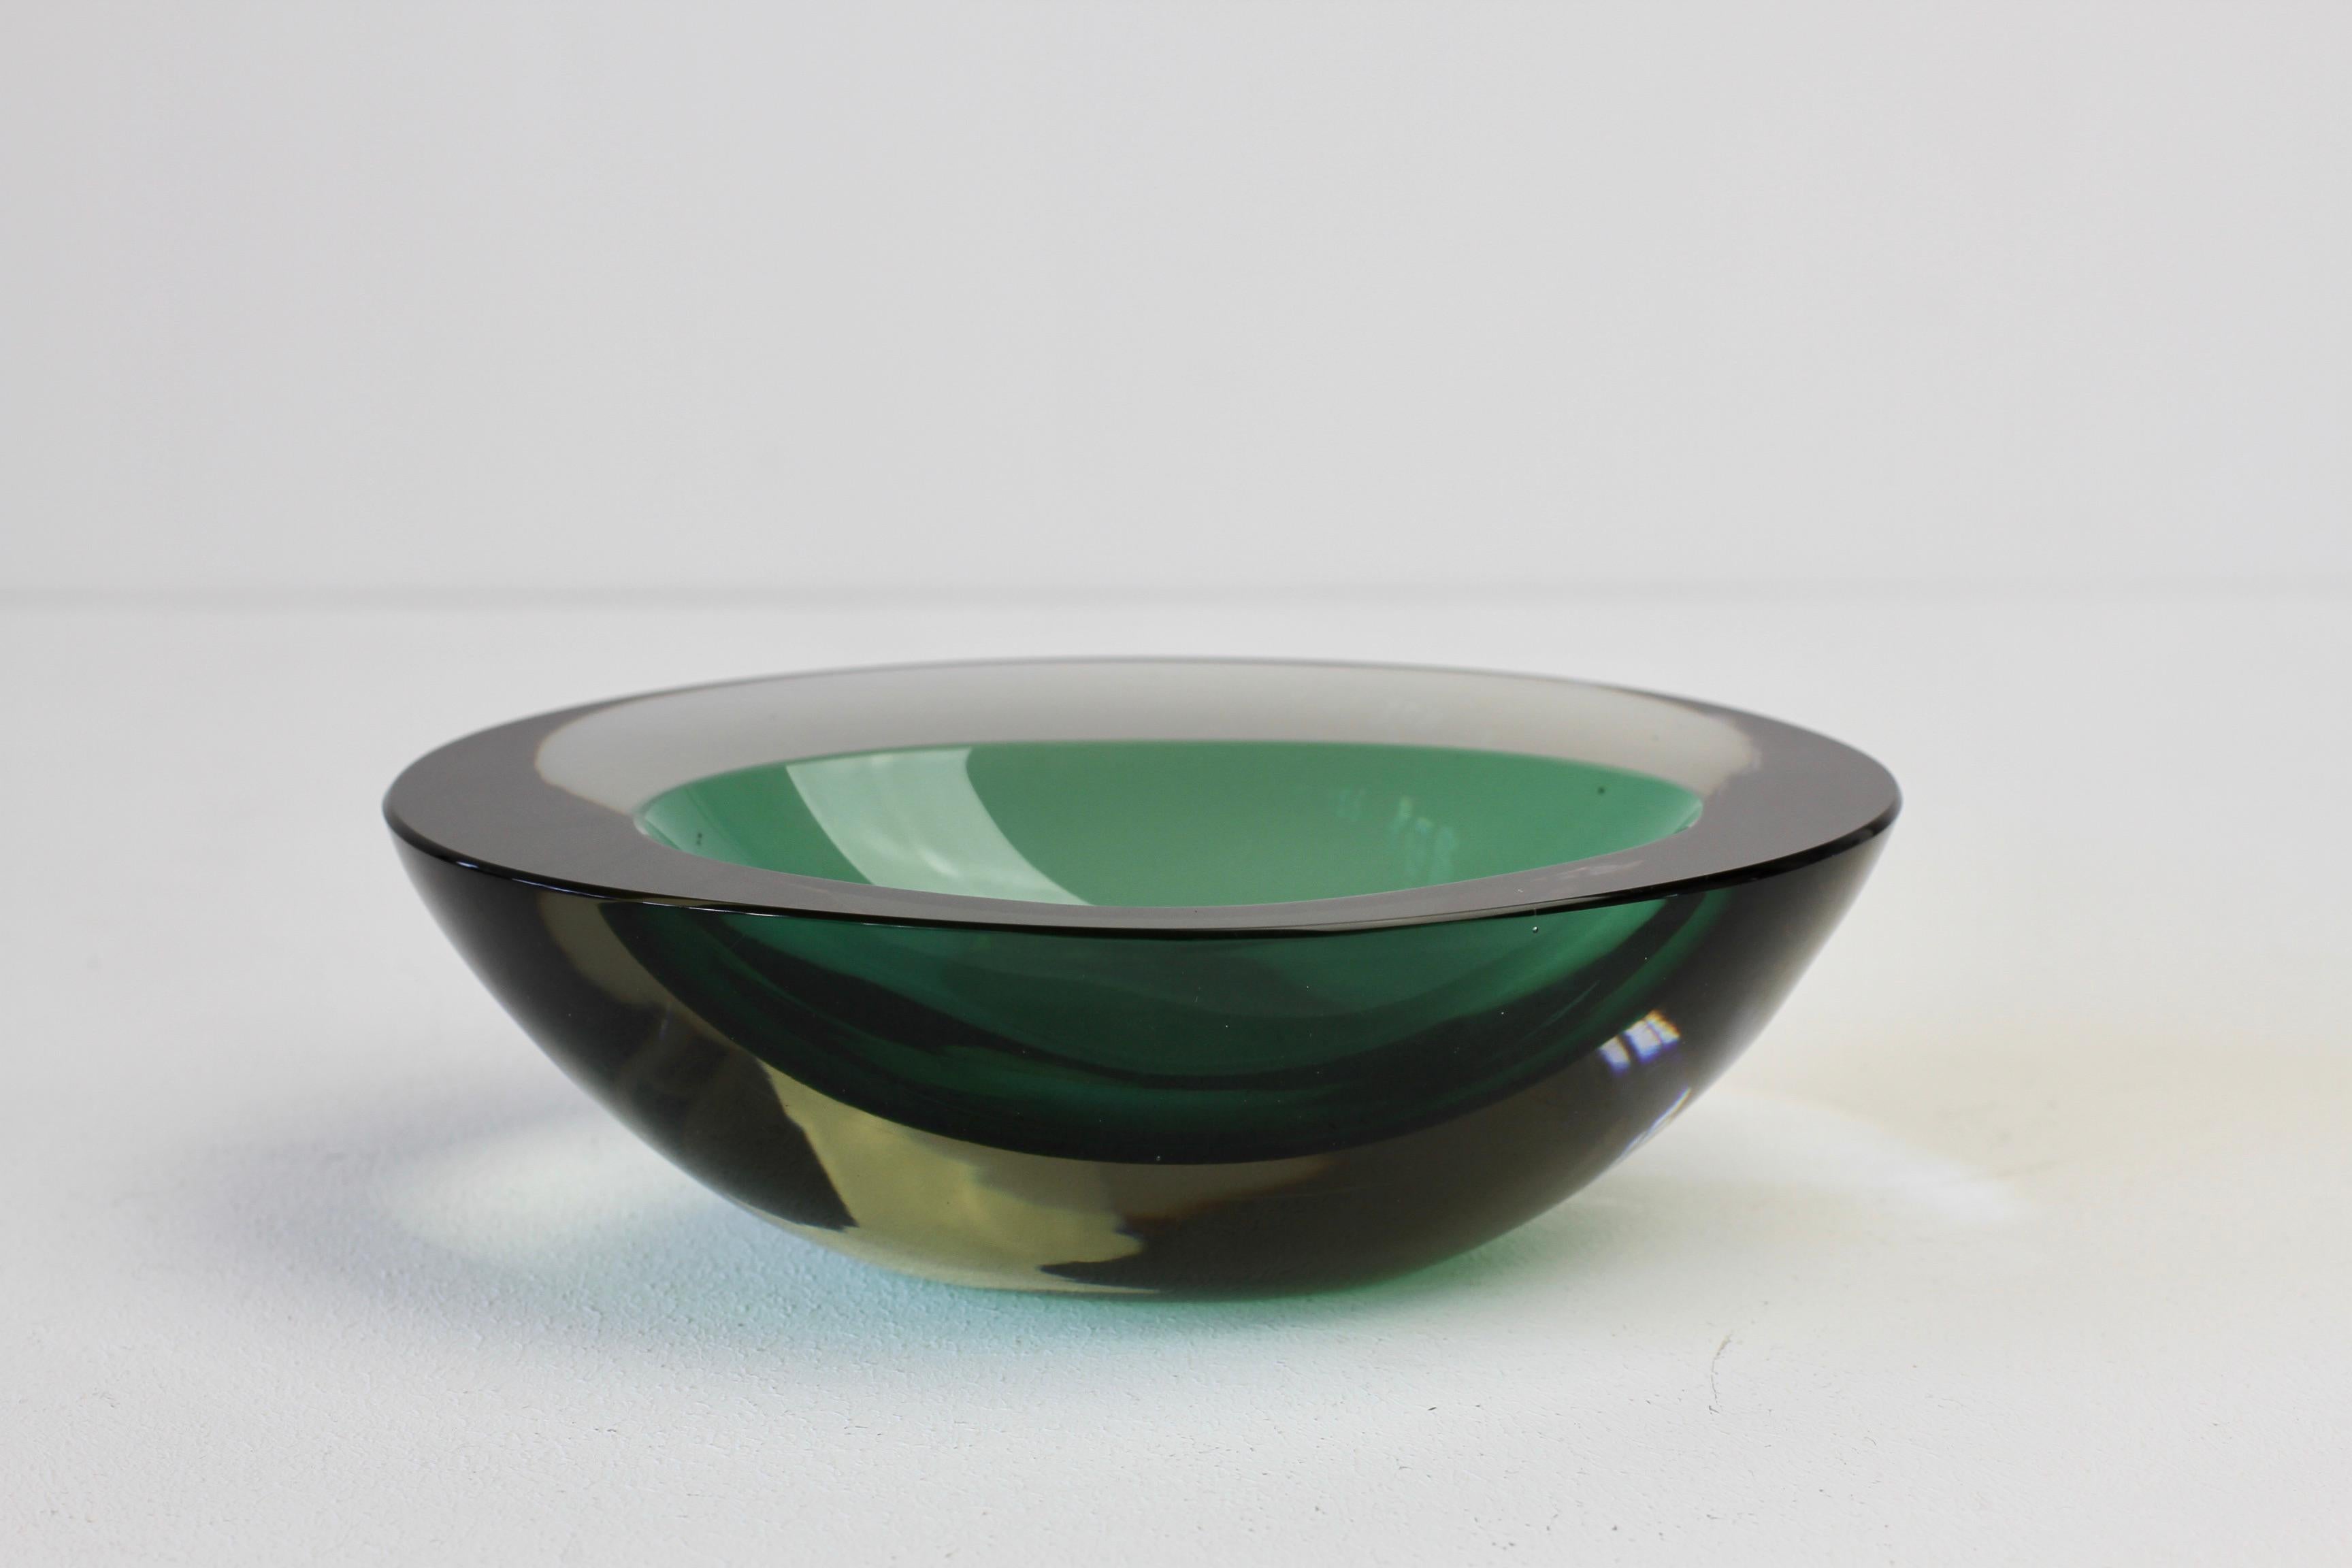 Large Cenedese Italian Asymmetric Green Sommerso Murano Glass Bowl Dish, Ashtray For Sale 6